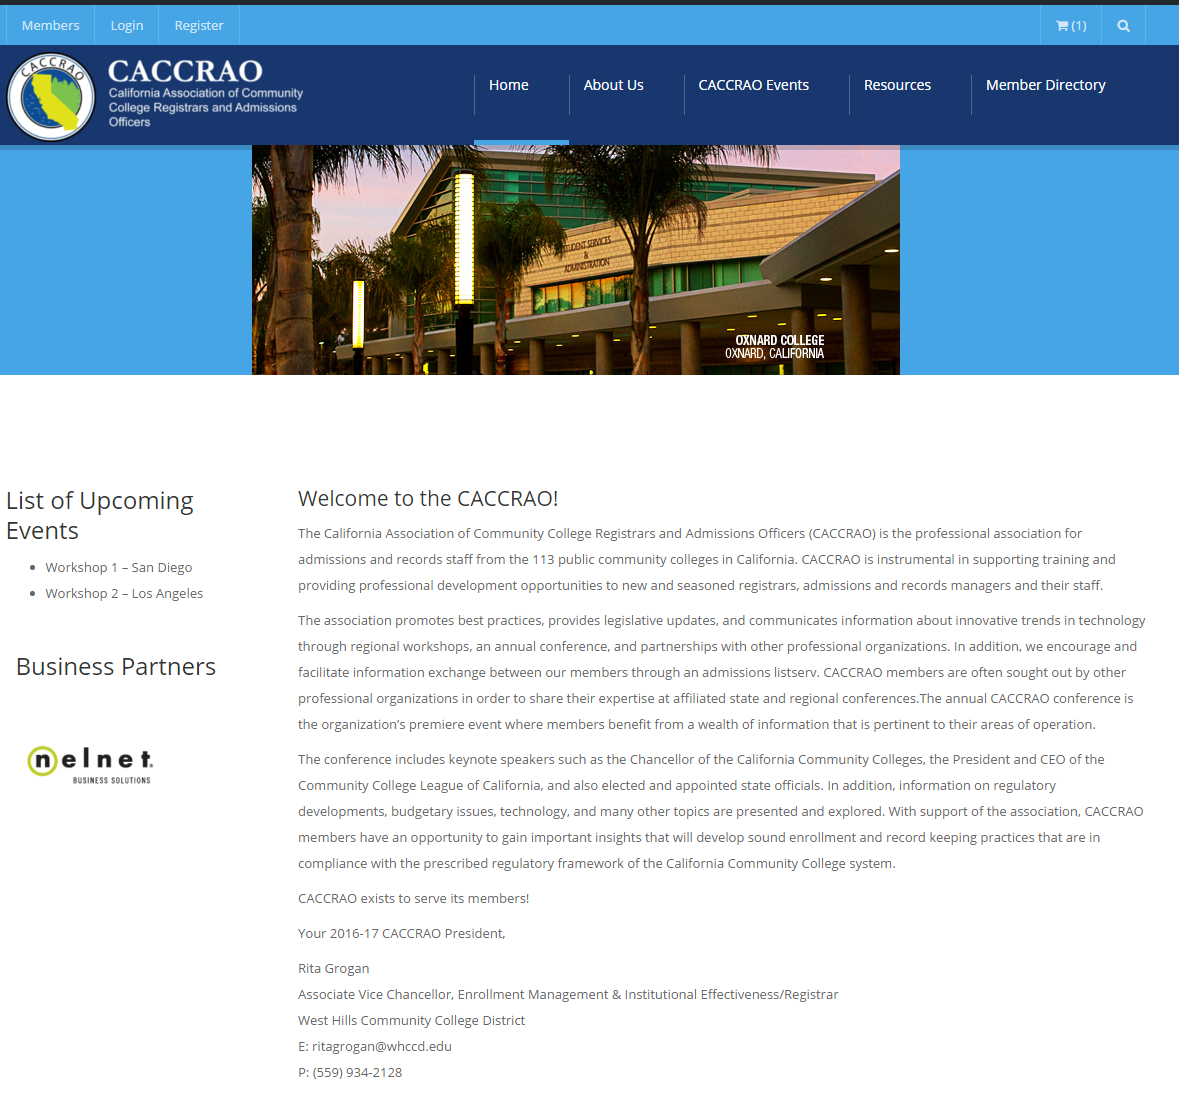 Welcome to the new CACCRAO Website